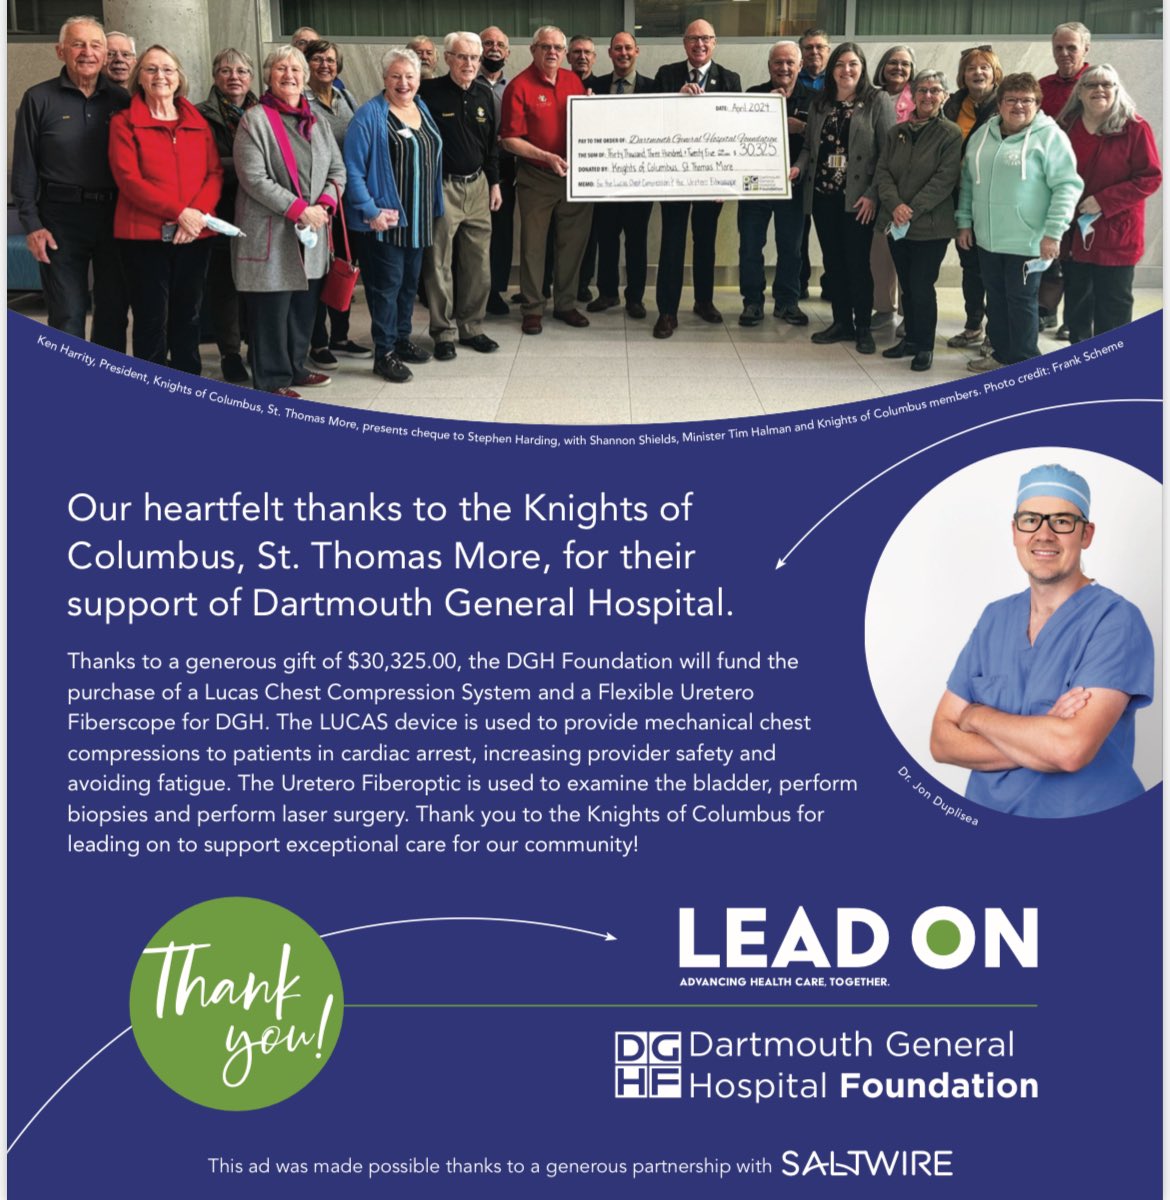 Our heartfelt thanks to the Knights of Columbus, St. Thomas More for their incredible support of the Dartmouth General Hospital Foundation - Check out the Chronicle Herald today -a new LUCAS Chest Compression system & Uretero Fiberscope are on the way❤️👏@DGHfoundation @HealthNS